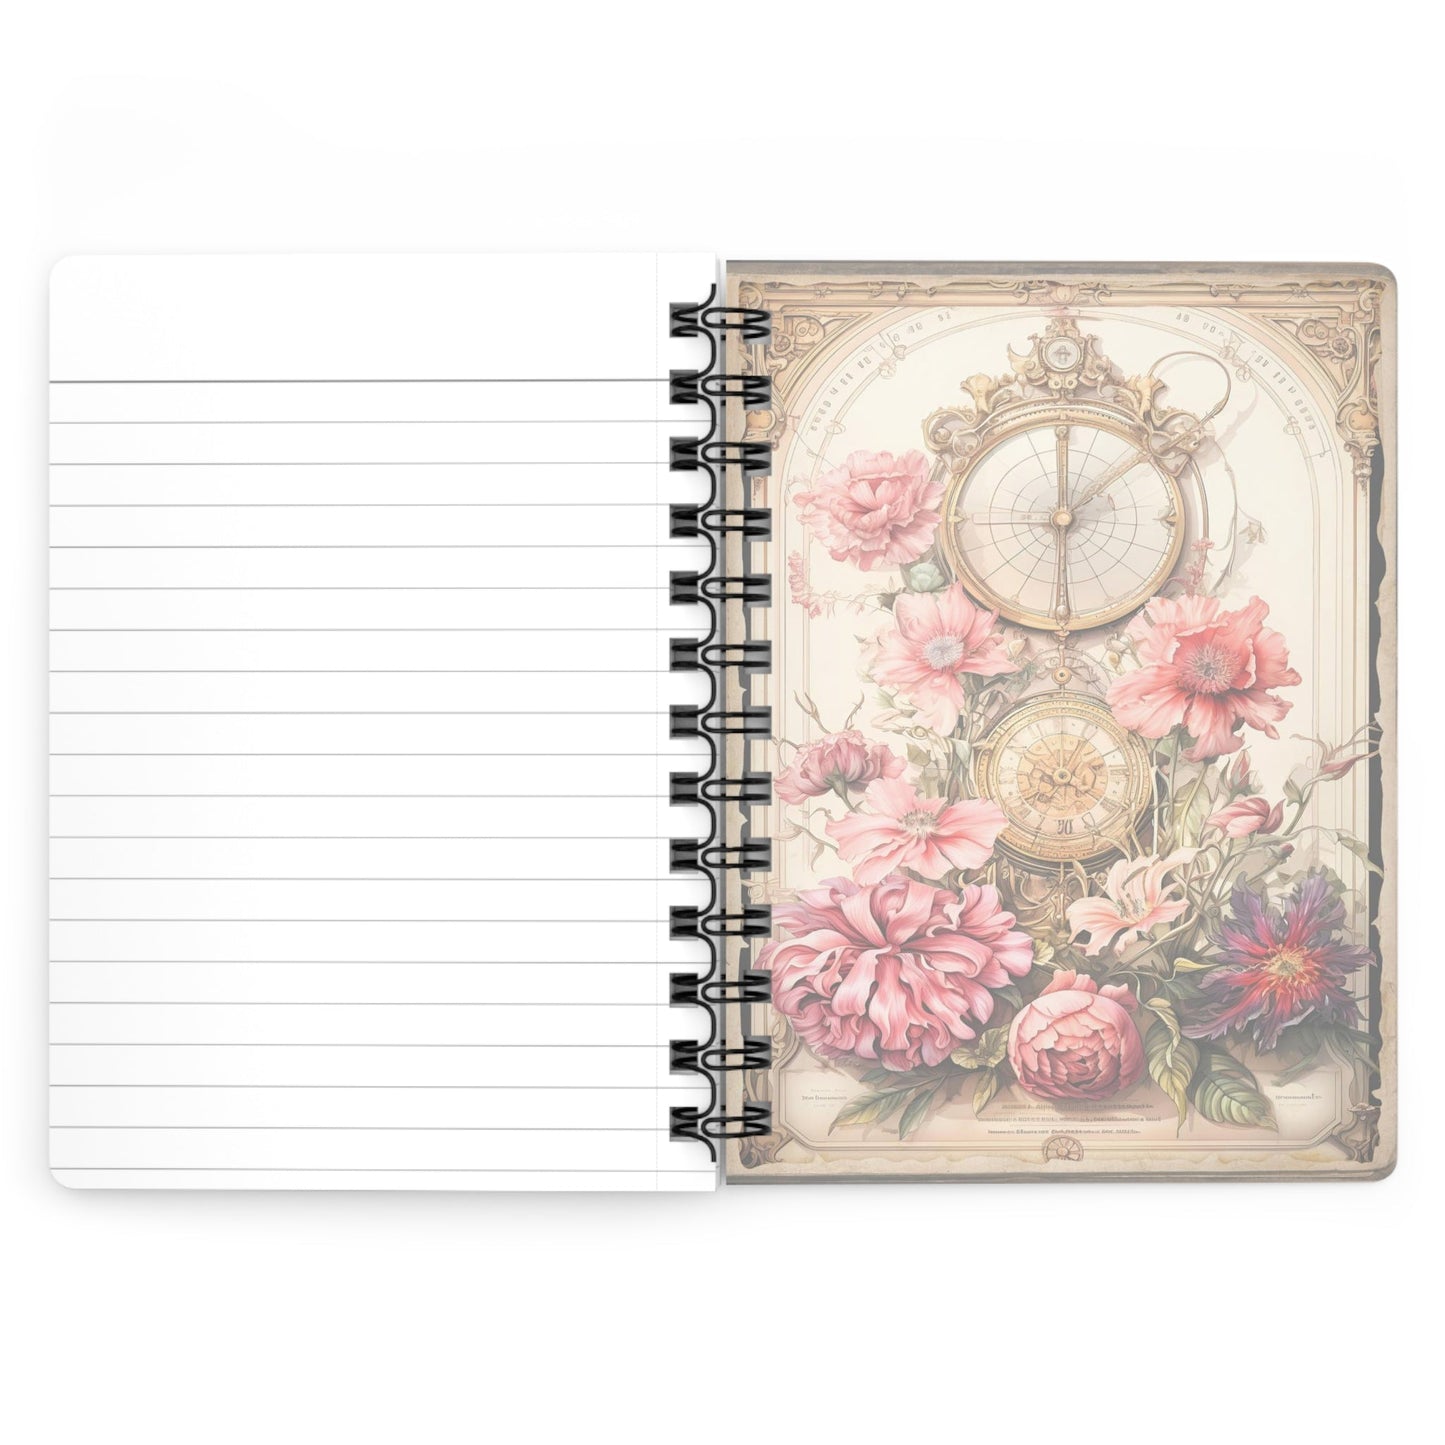 CrazyYetiClothing, CYC, Pisces - Floral Collection (Spiral Bound Journal), Paper products